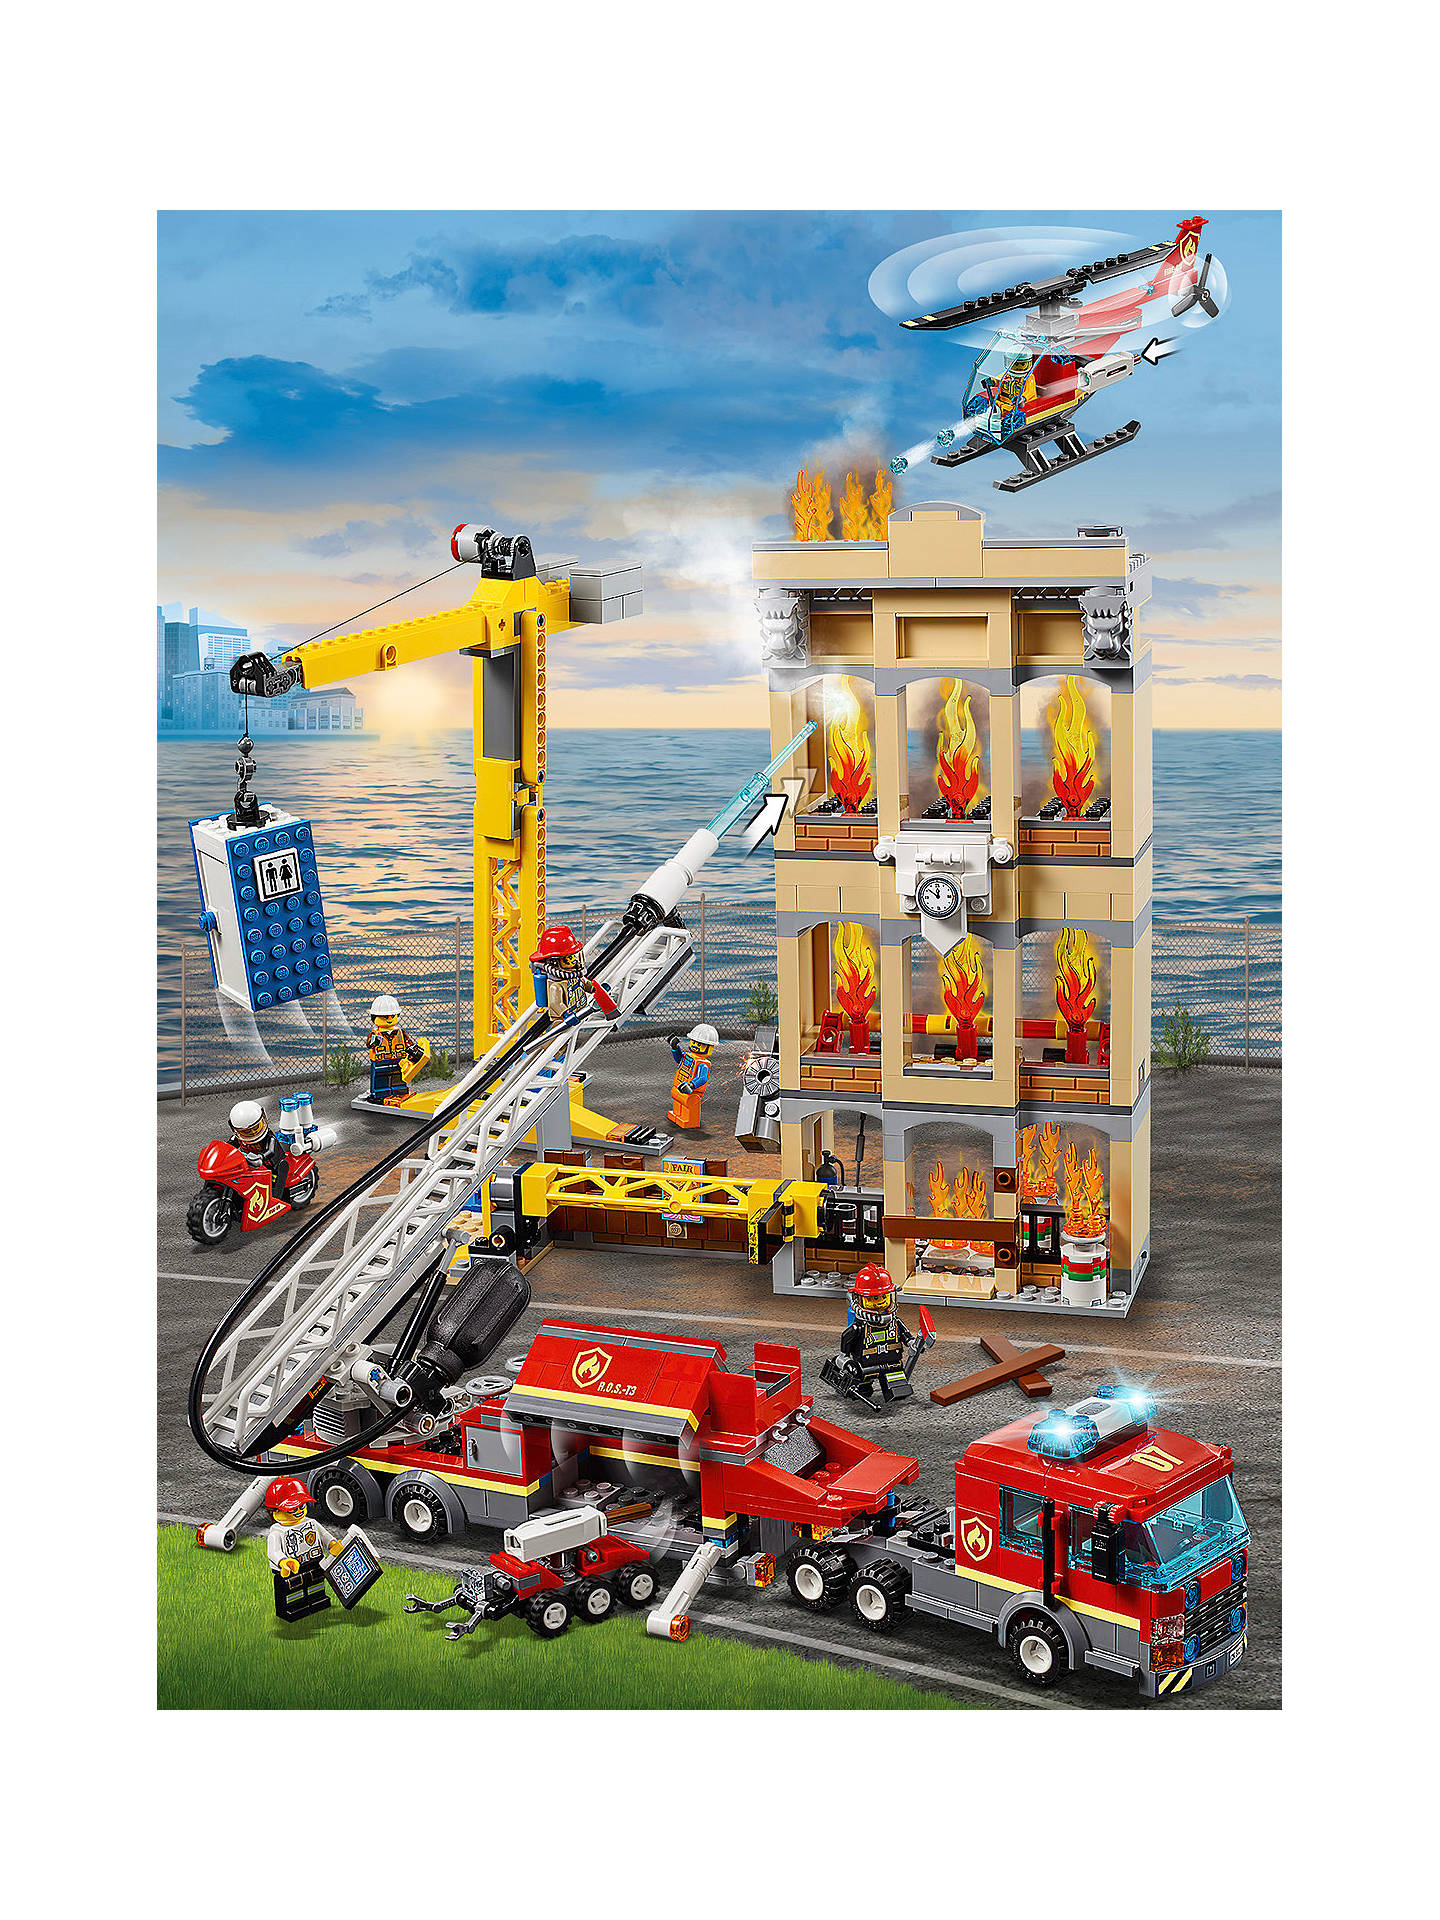 LEGO City 60216 Downtown Fire Brigade at John Lewis & Partners